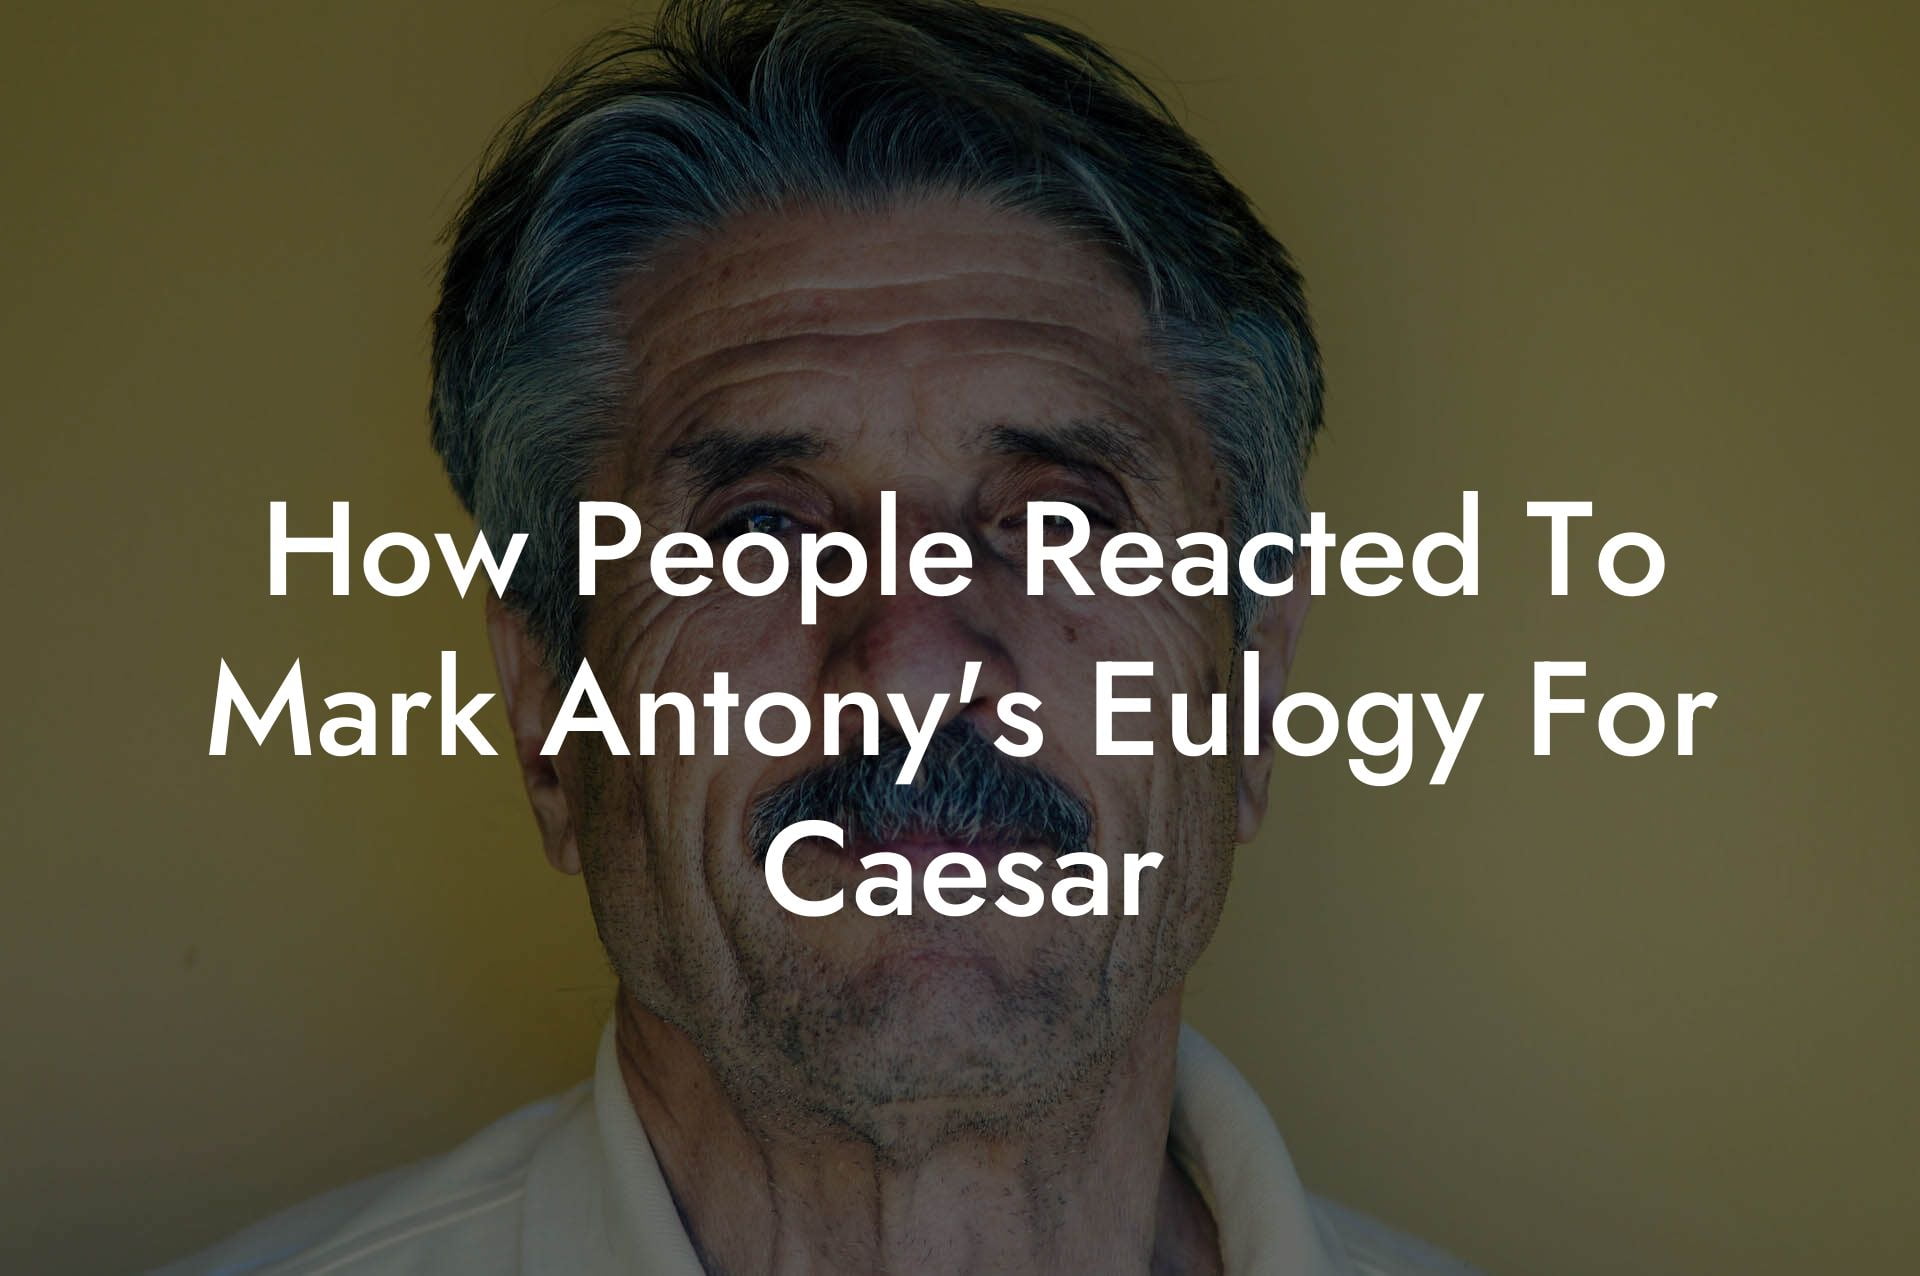 How People Reacted To Mark Antony's Eulogy For Caesar